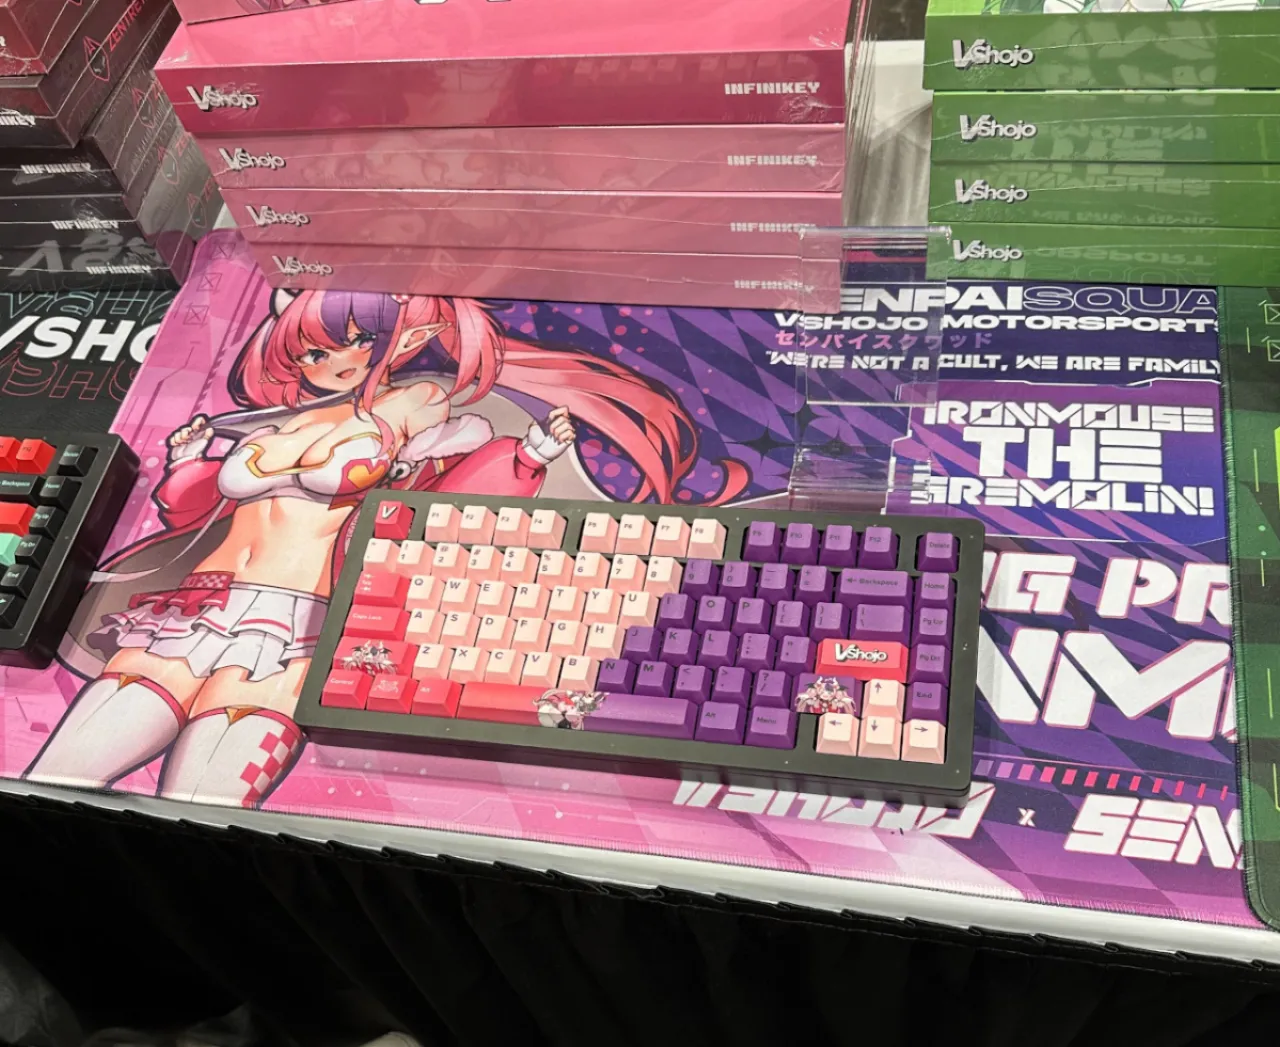 The Ironmouse Infinikey keyboard, as seen at Anime NYC.